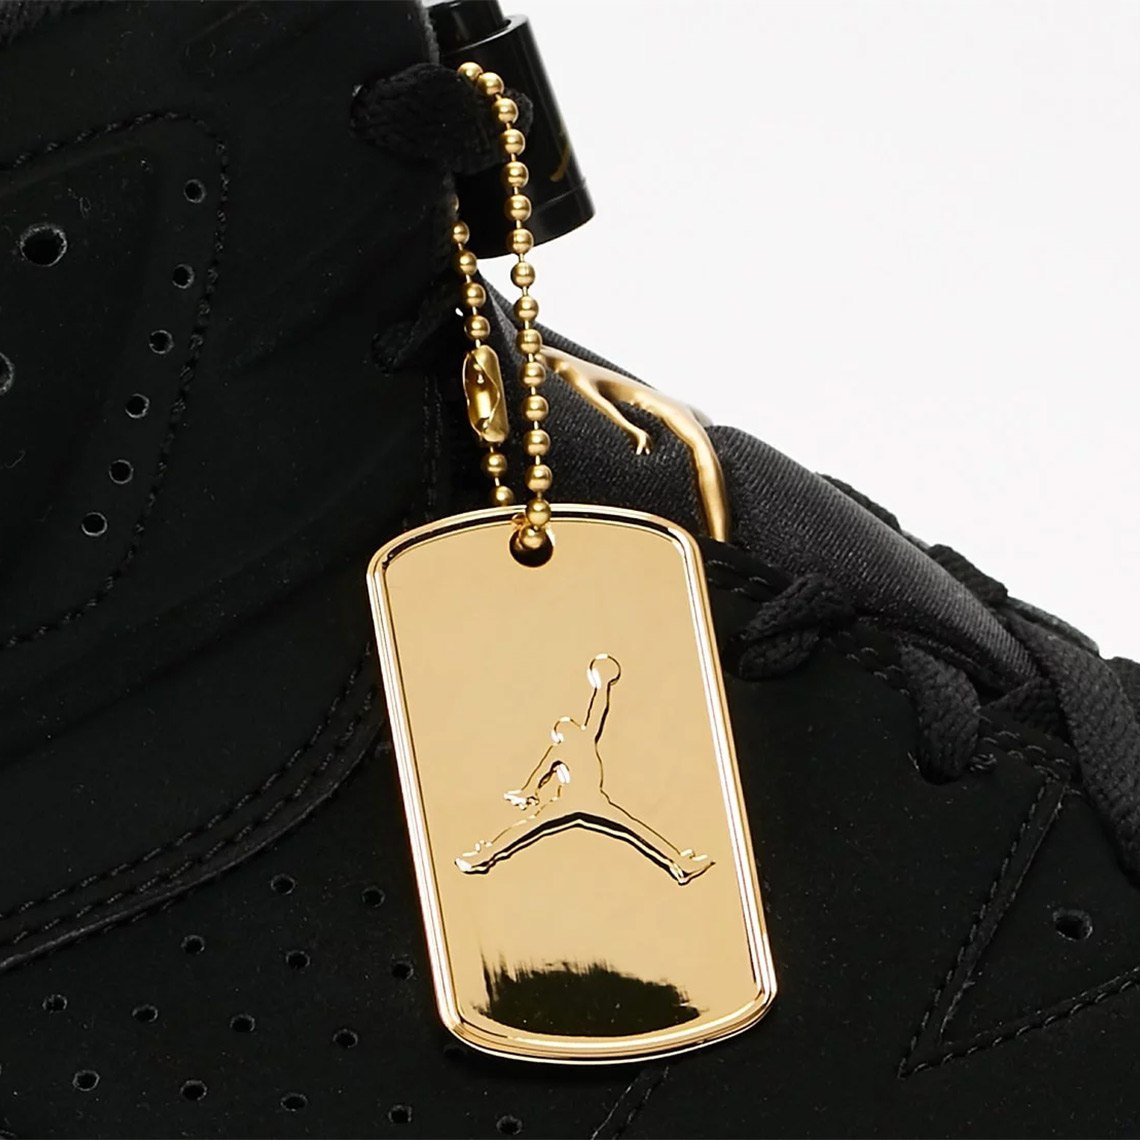 The Jordan brand has remixed one of the most iconic J colourways with this recently surfaced Dmp Ct4954 007 Official Release Date 6